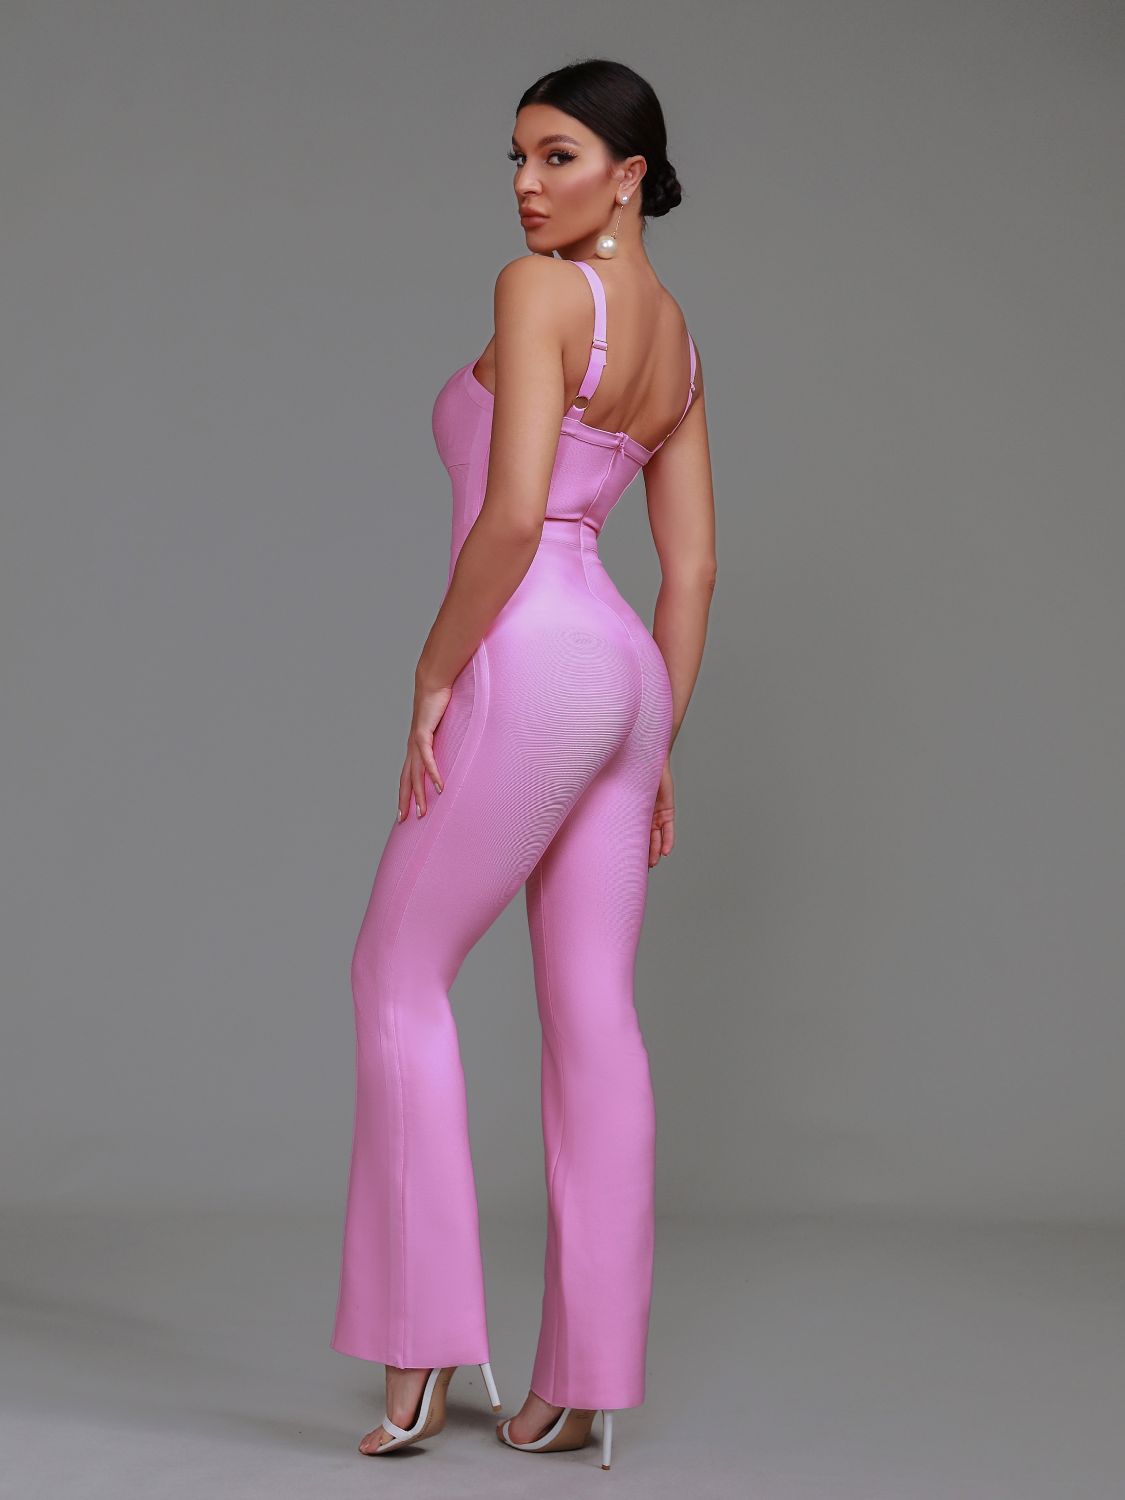 Ribbed Pink Bandage Jumpsuit Women Wide Leg Jumpsuit Bodycon Elegant Sexy Birthday Evening Party Club Outfits Summer 2023